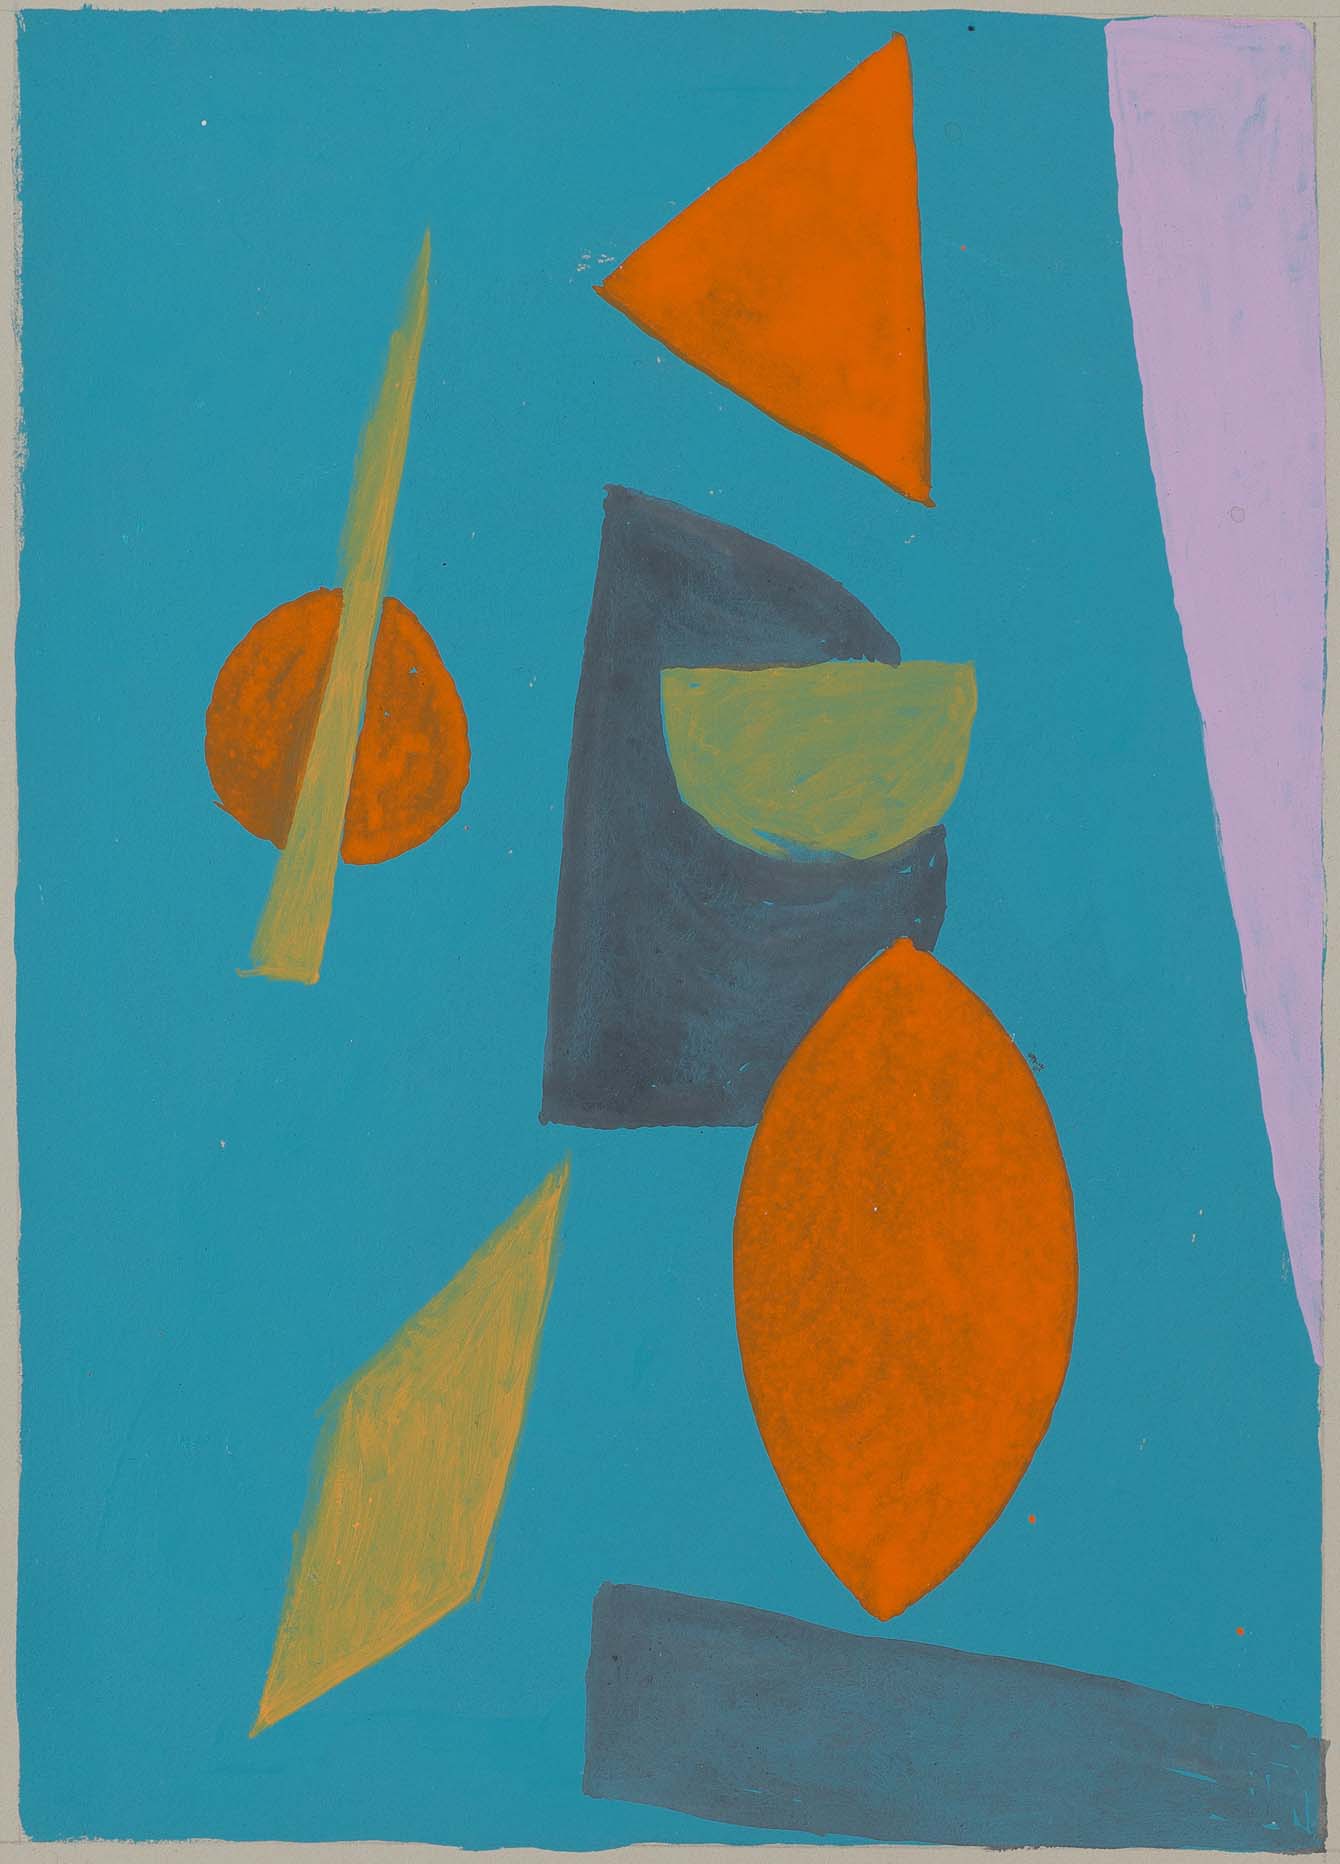  Peter Young,  #28 - 1989 , 1989, acrylic on paper, 15 x 11 1/2 inches (38.1 x 29.2 cm) 